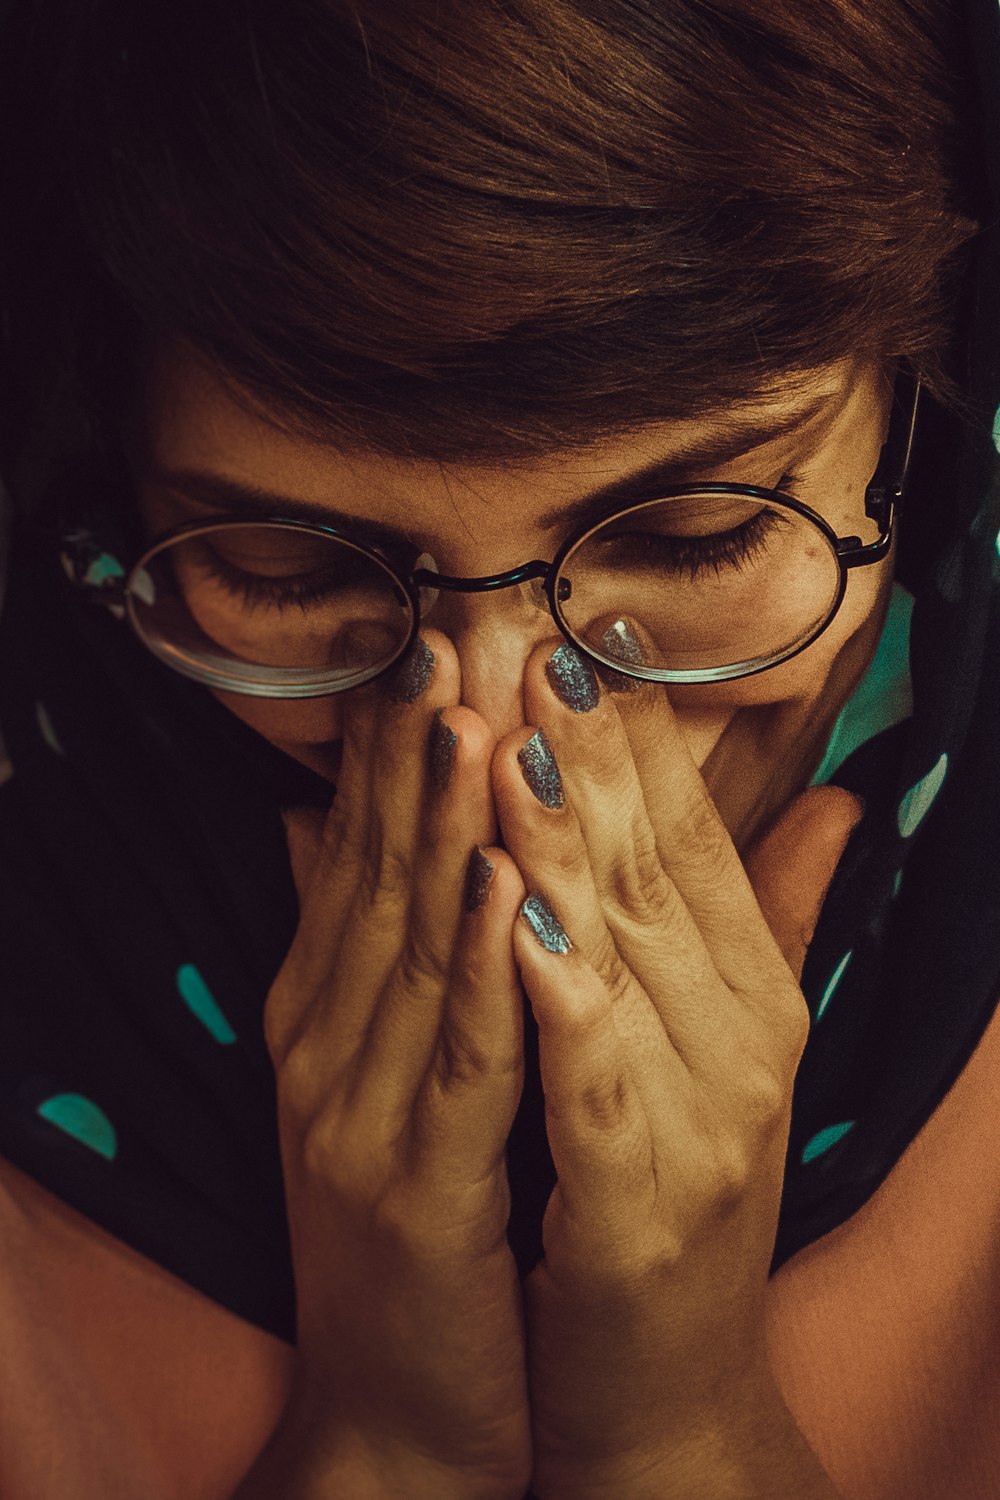 a woman wearing glasses covers her face with her hands